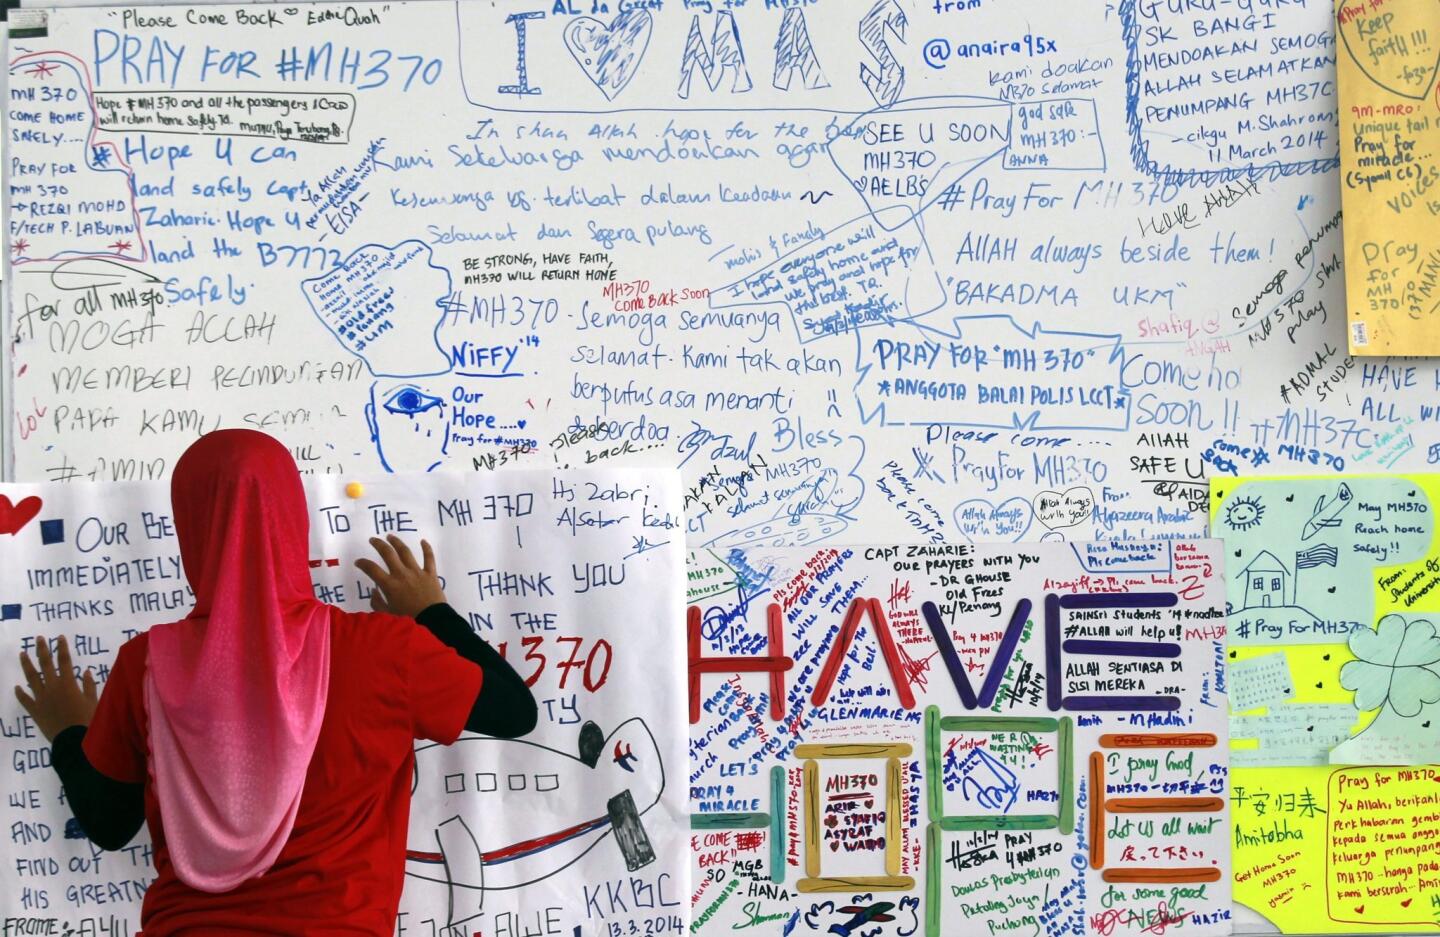 A well-wisher hangs up messages for the passengers of the missing Malaysian Airline plane at Kuala Lumpur International Airport, Malaysia, 14 March 2014.